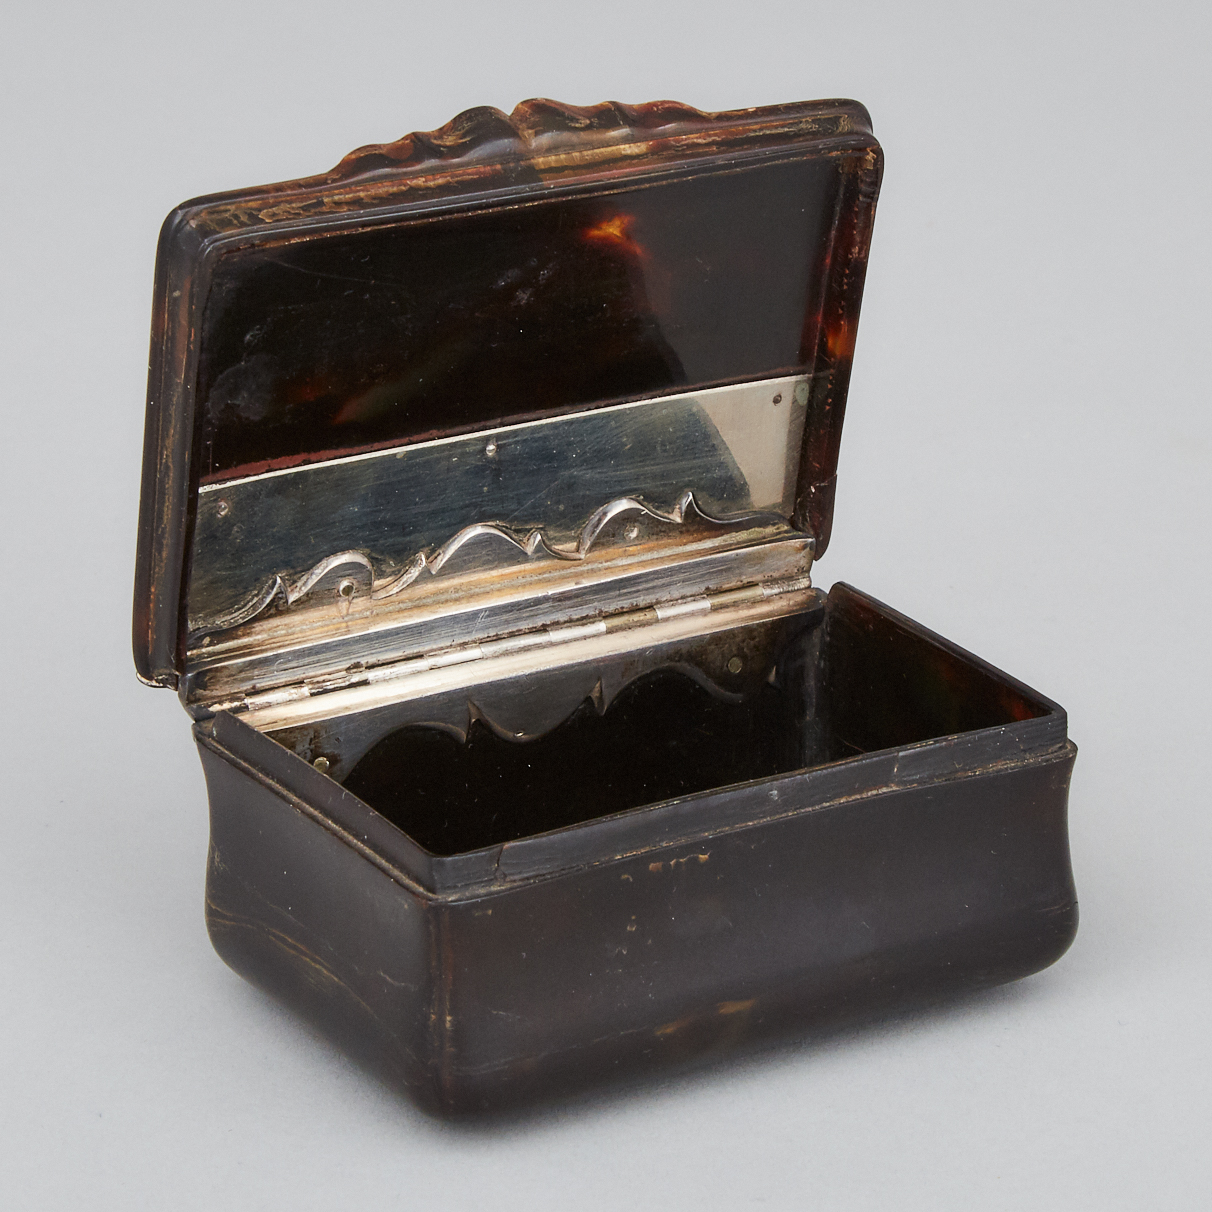 French Silver and Abalone Inlaid Tortoiseshell Snuff Box, 18th century